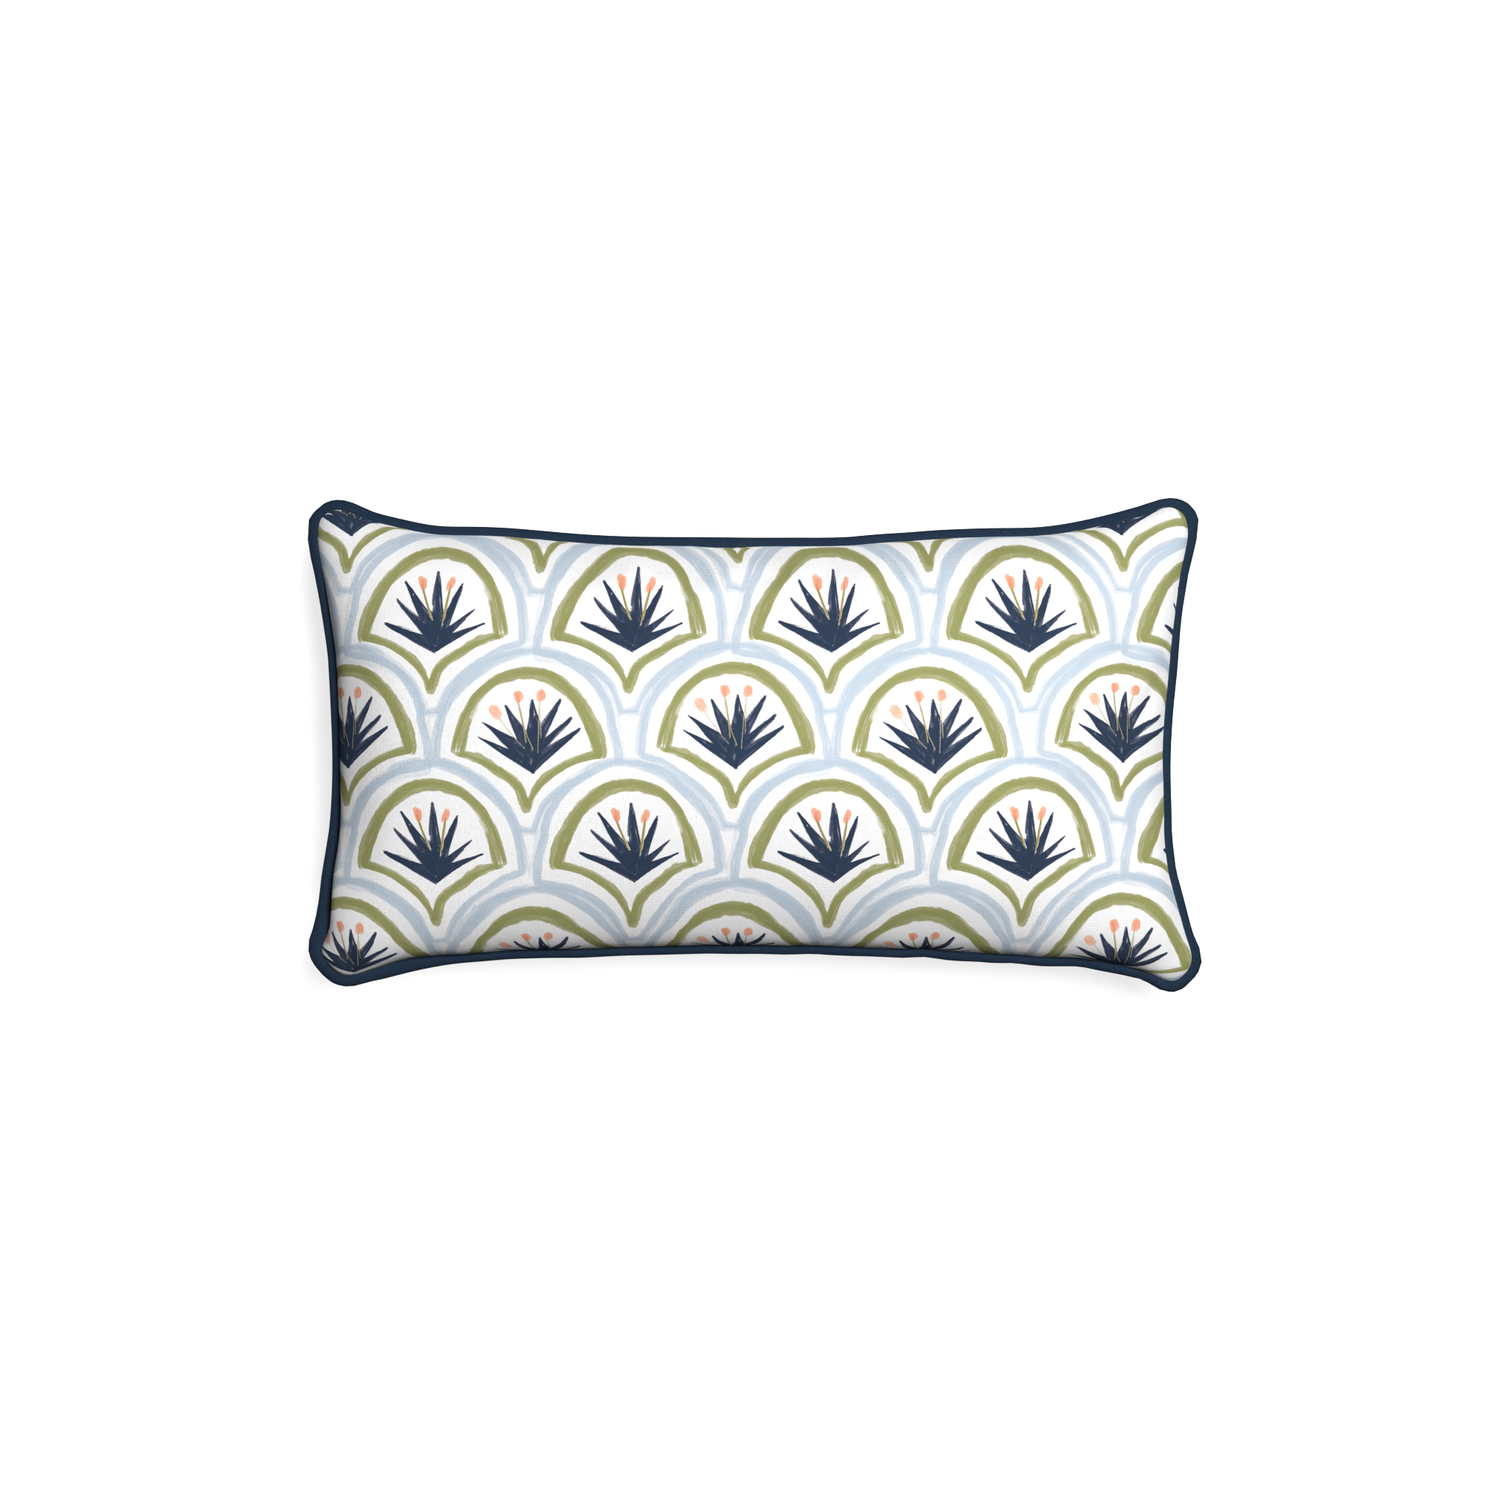 Petite-lumbar thatcher midnight custom art deco palm patternpillow with c piping on white background